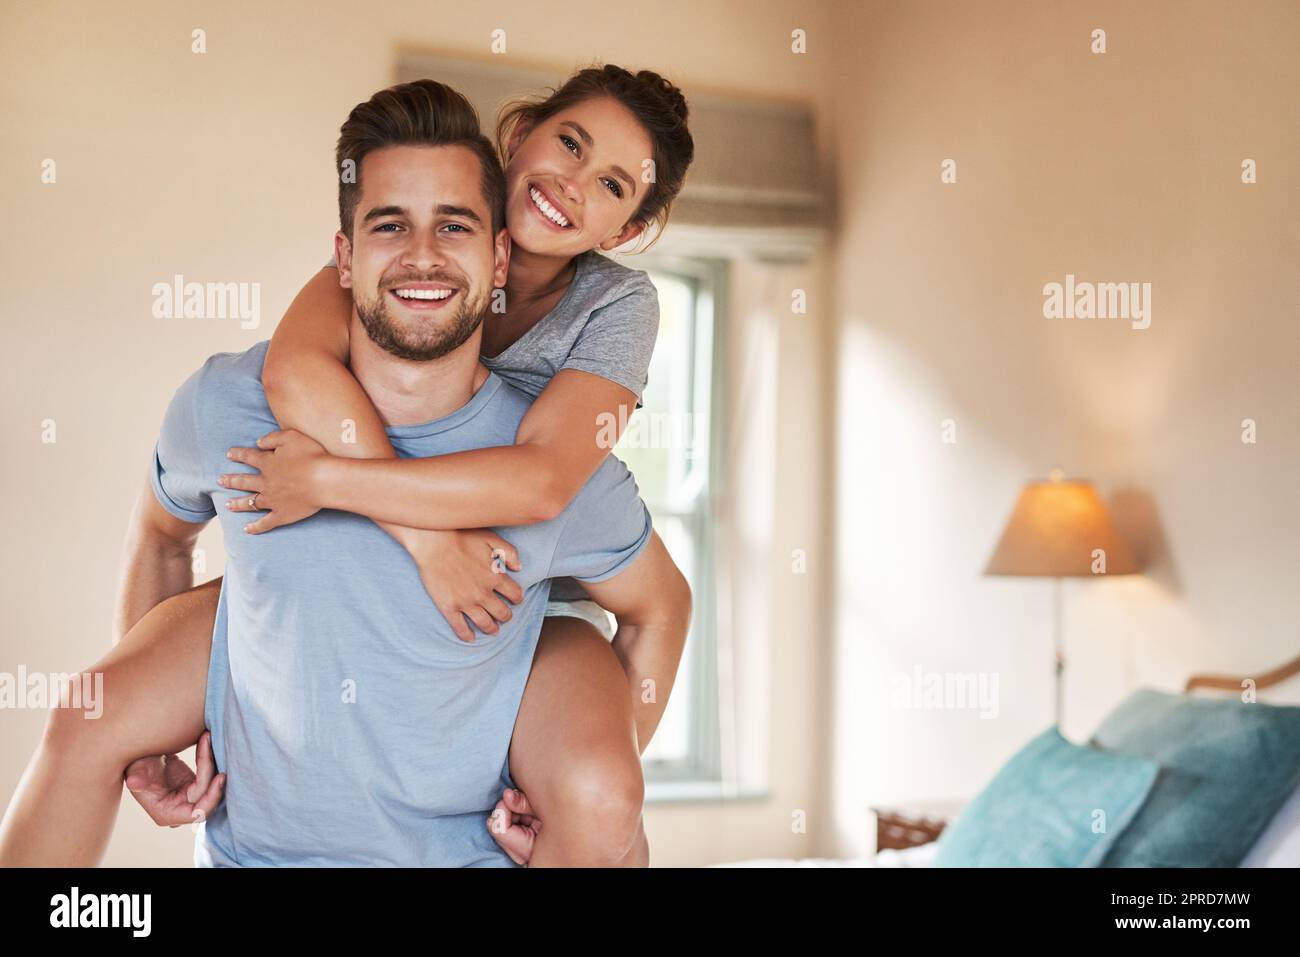 Live a life full of love and happiness. Portrait of a playful young couple spending some quality time together in their bedroom. Stock Photo